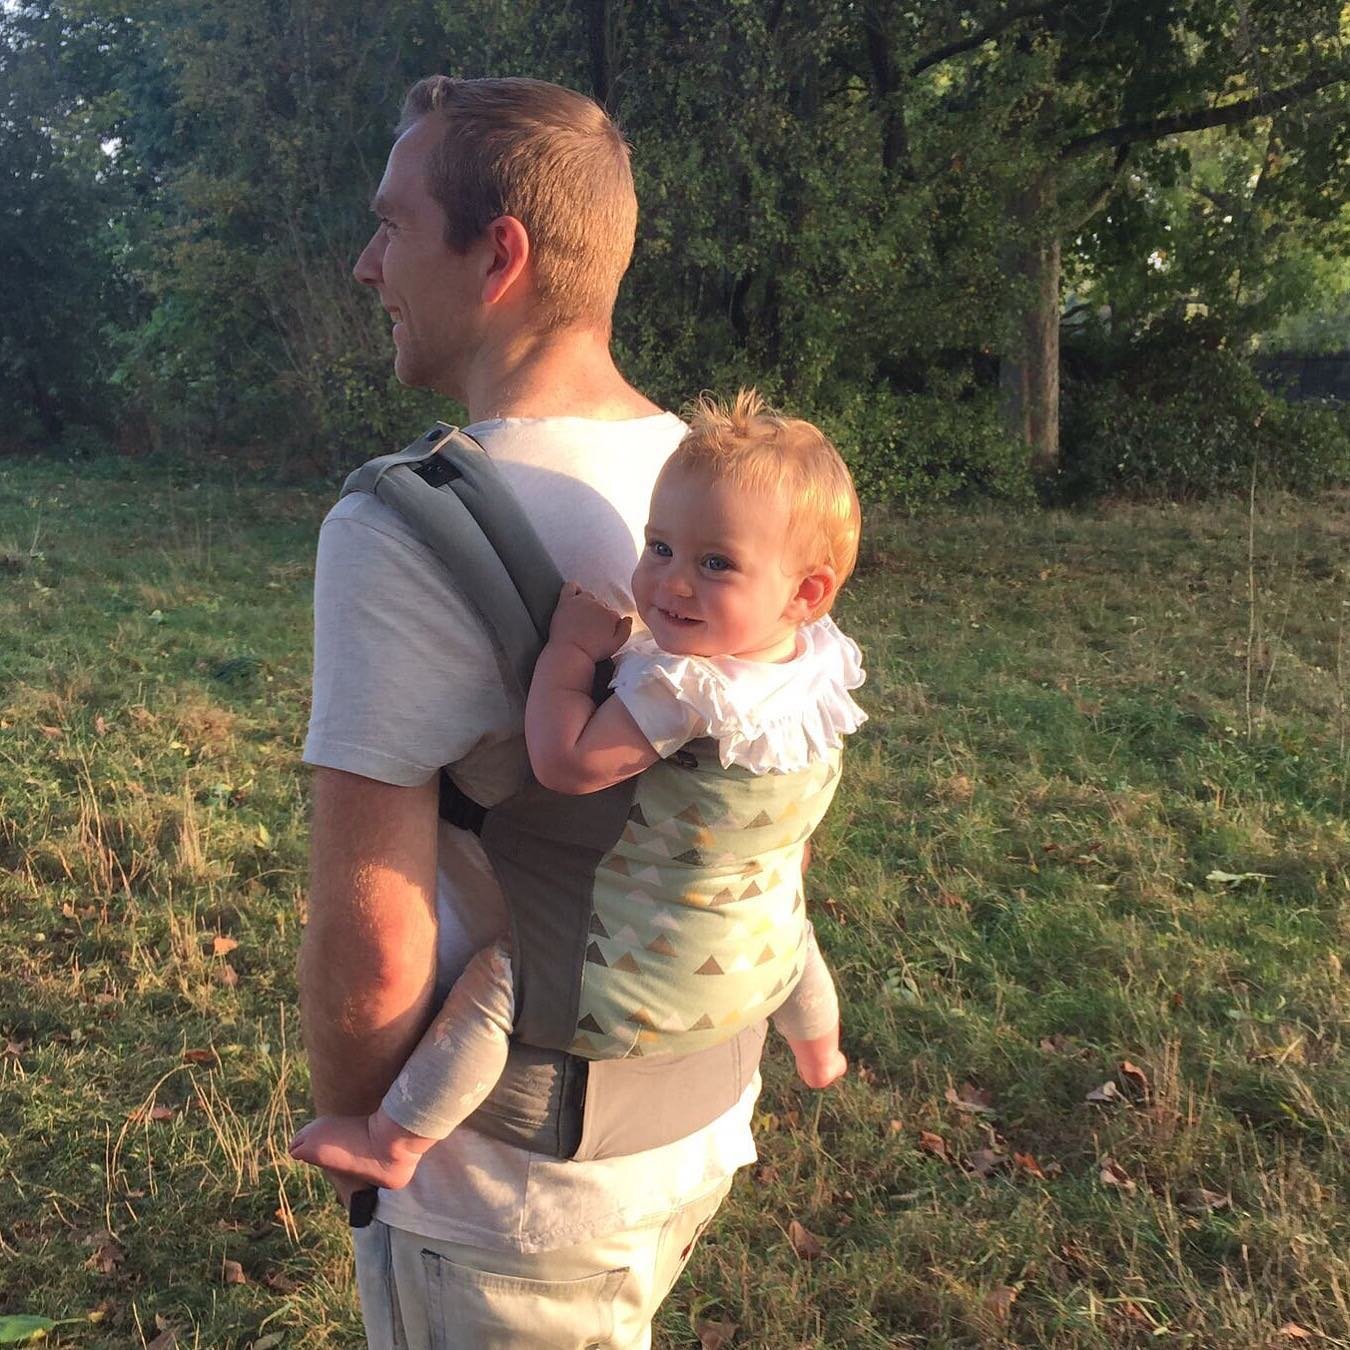 Come along and see us if you&rsquo;d like to know how to confidently and comfortably back carry. 

Whether you have your own sling you want help with, or want to hire or subscribe, we&rsquo;re here! 

#backcarrying #piggyback #toddlercarrying #babyca